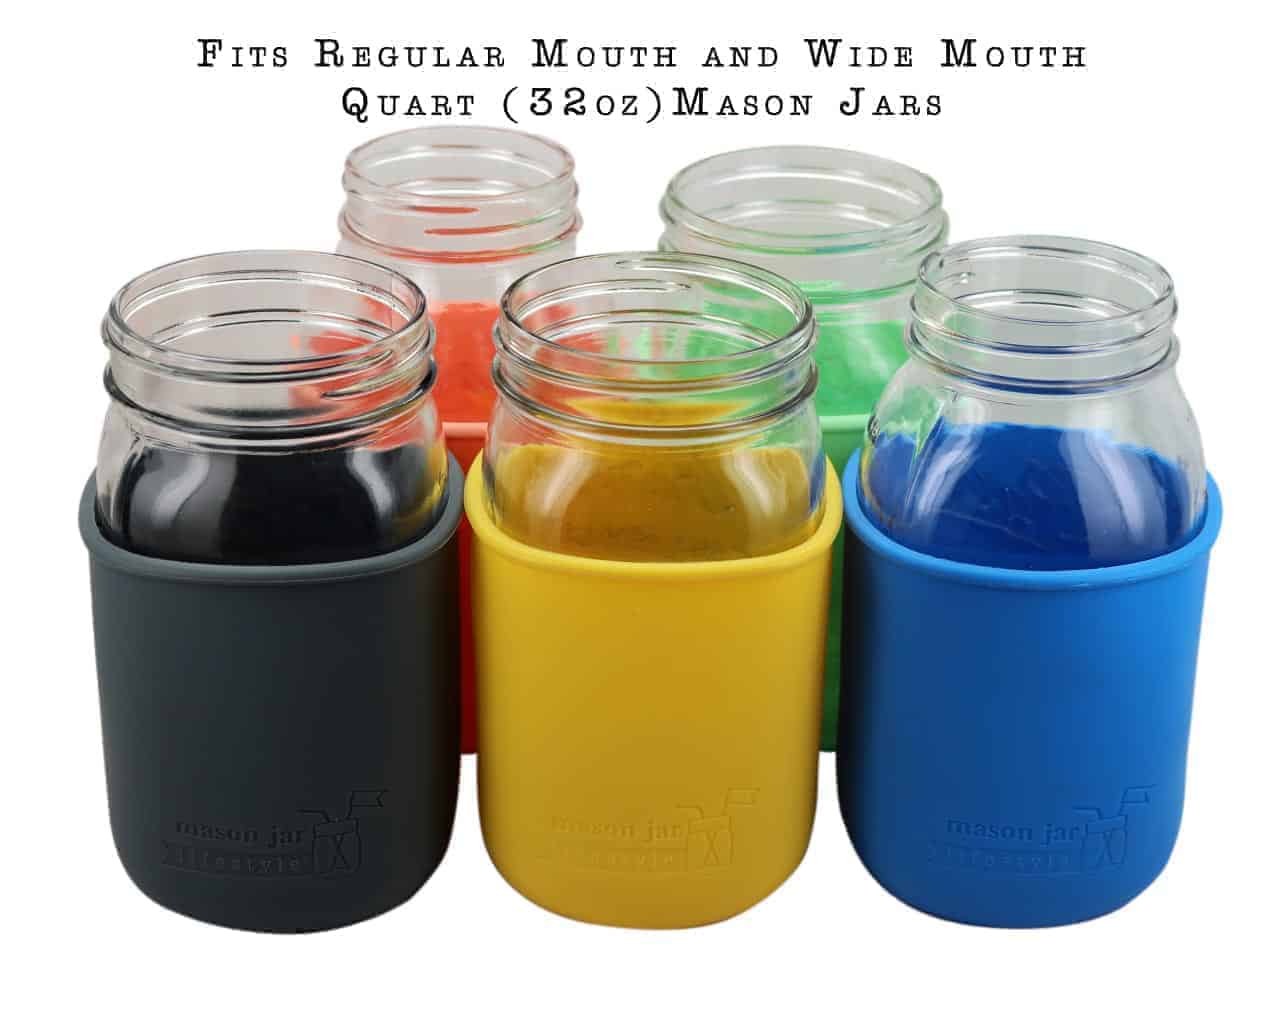 Silicone sleeves for regular or wide mouth quart 32oz Mason jars in five colors